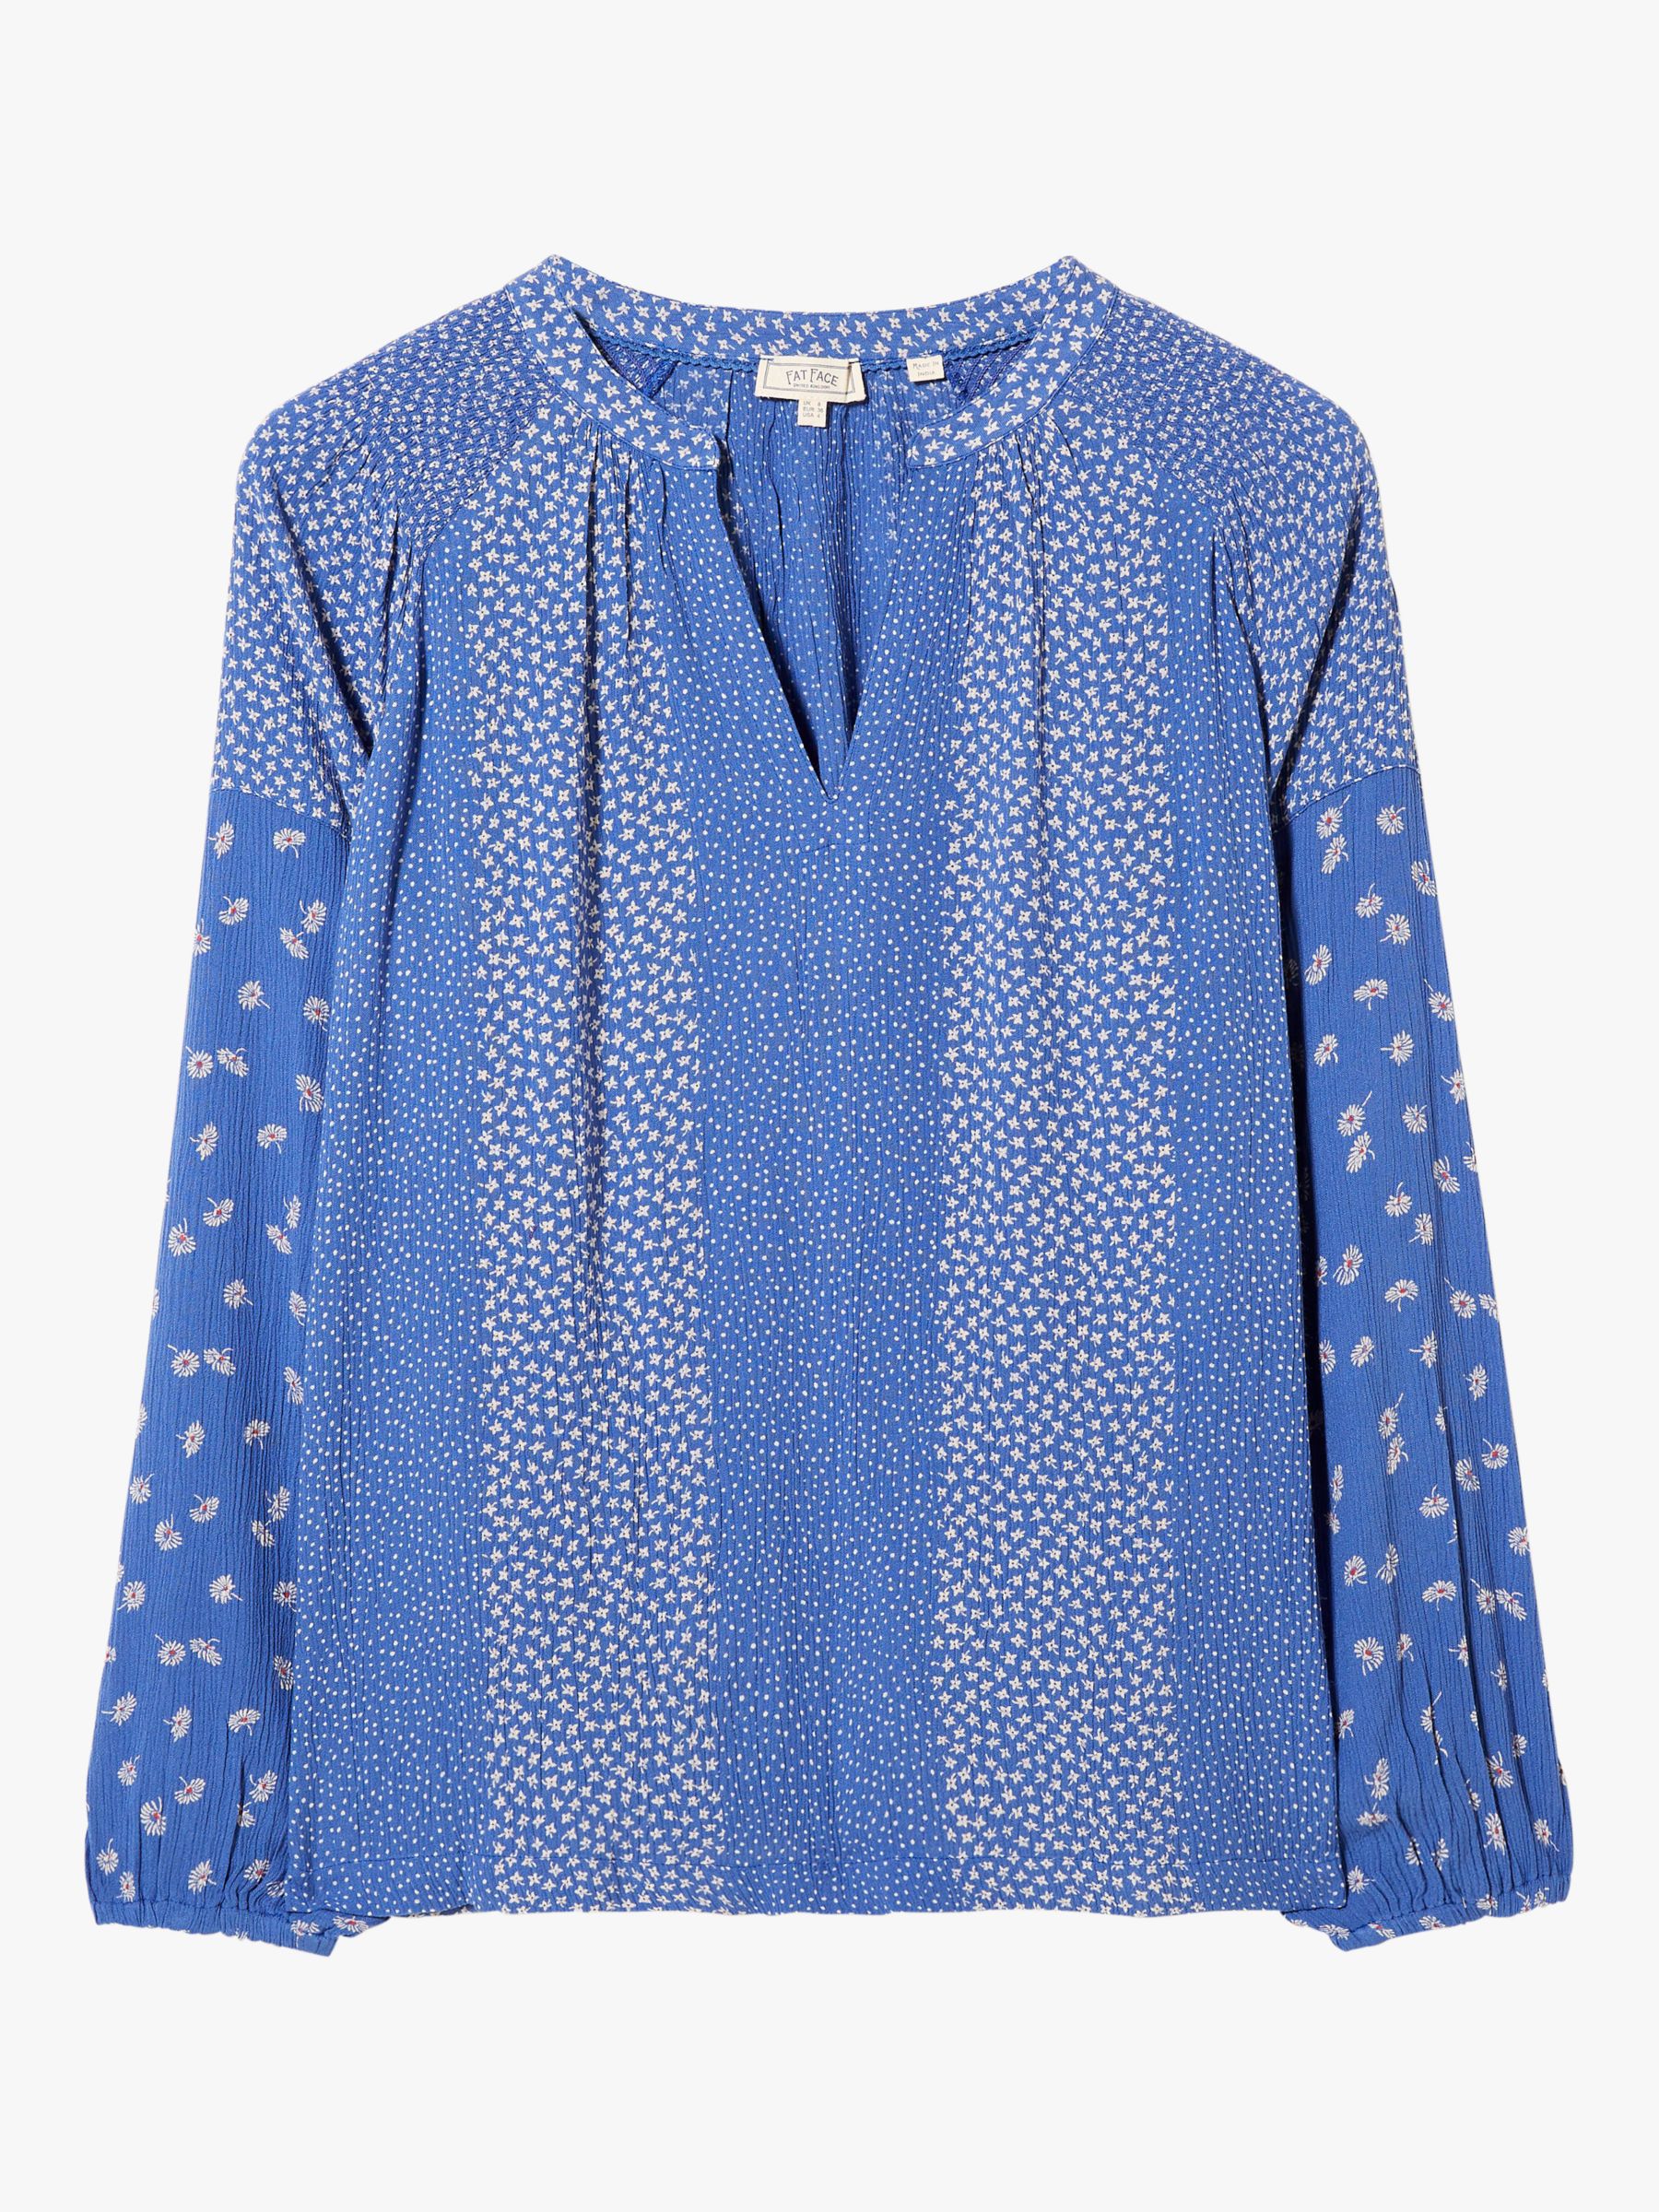 Fatface Rosie Ditsy Floral Print Blouse Cornflower Blue At John Lewis And Partners